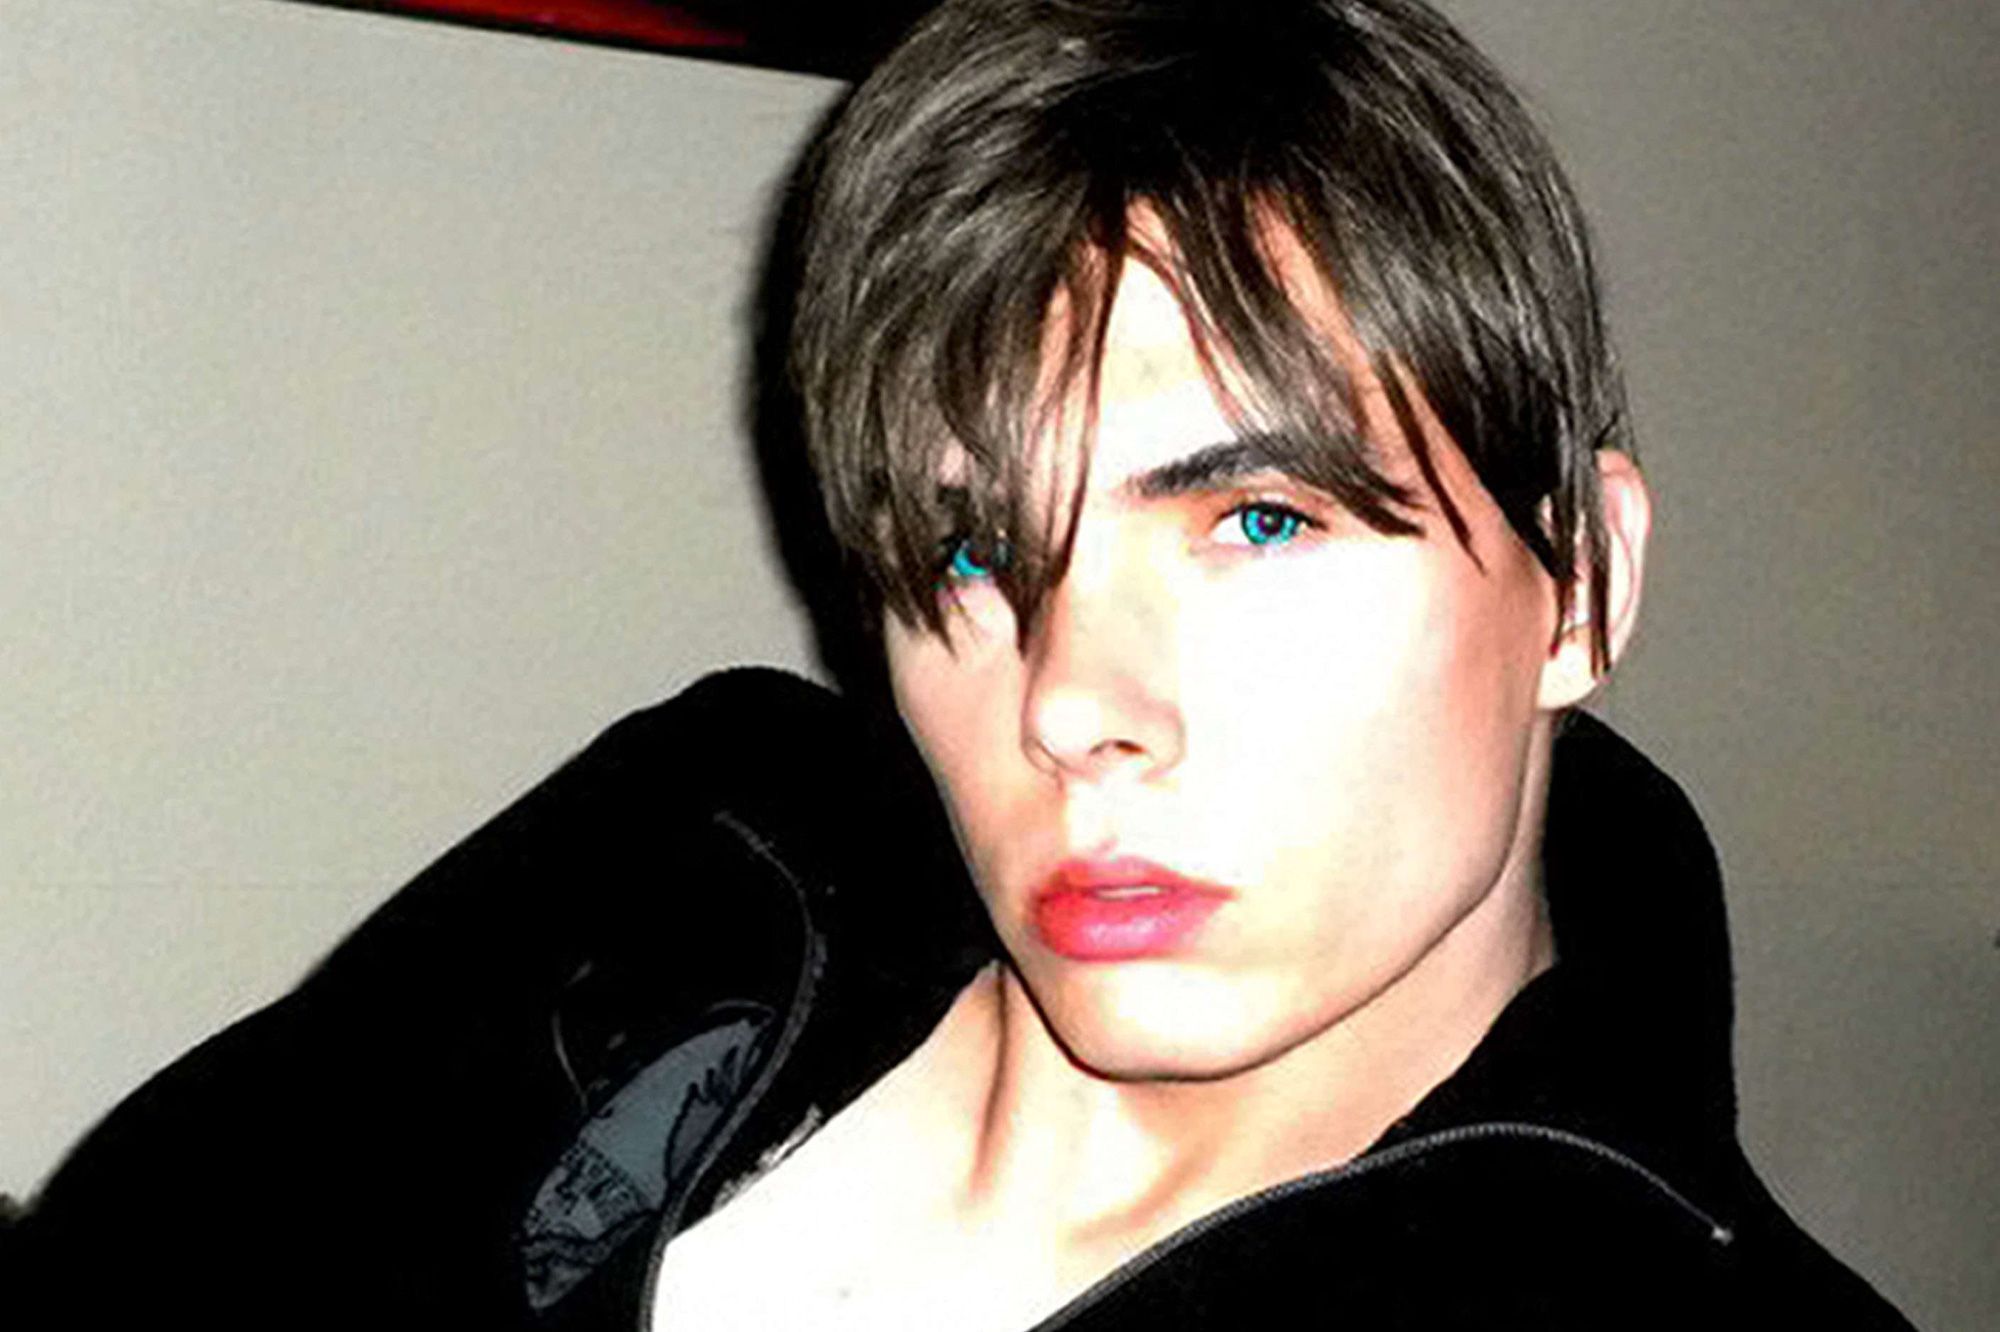 « Don’t F**k With Cats » : qui est Luka Rocco Magnotta ?